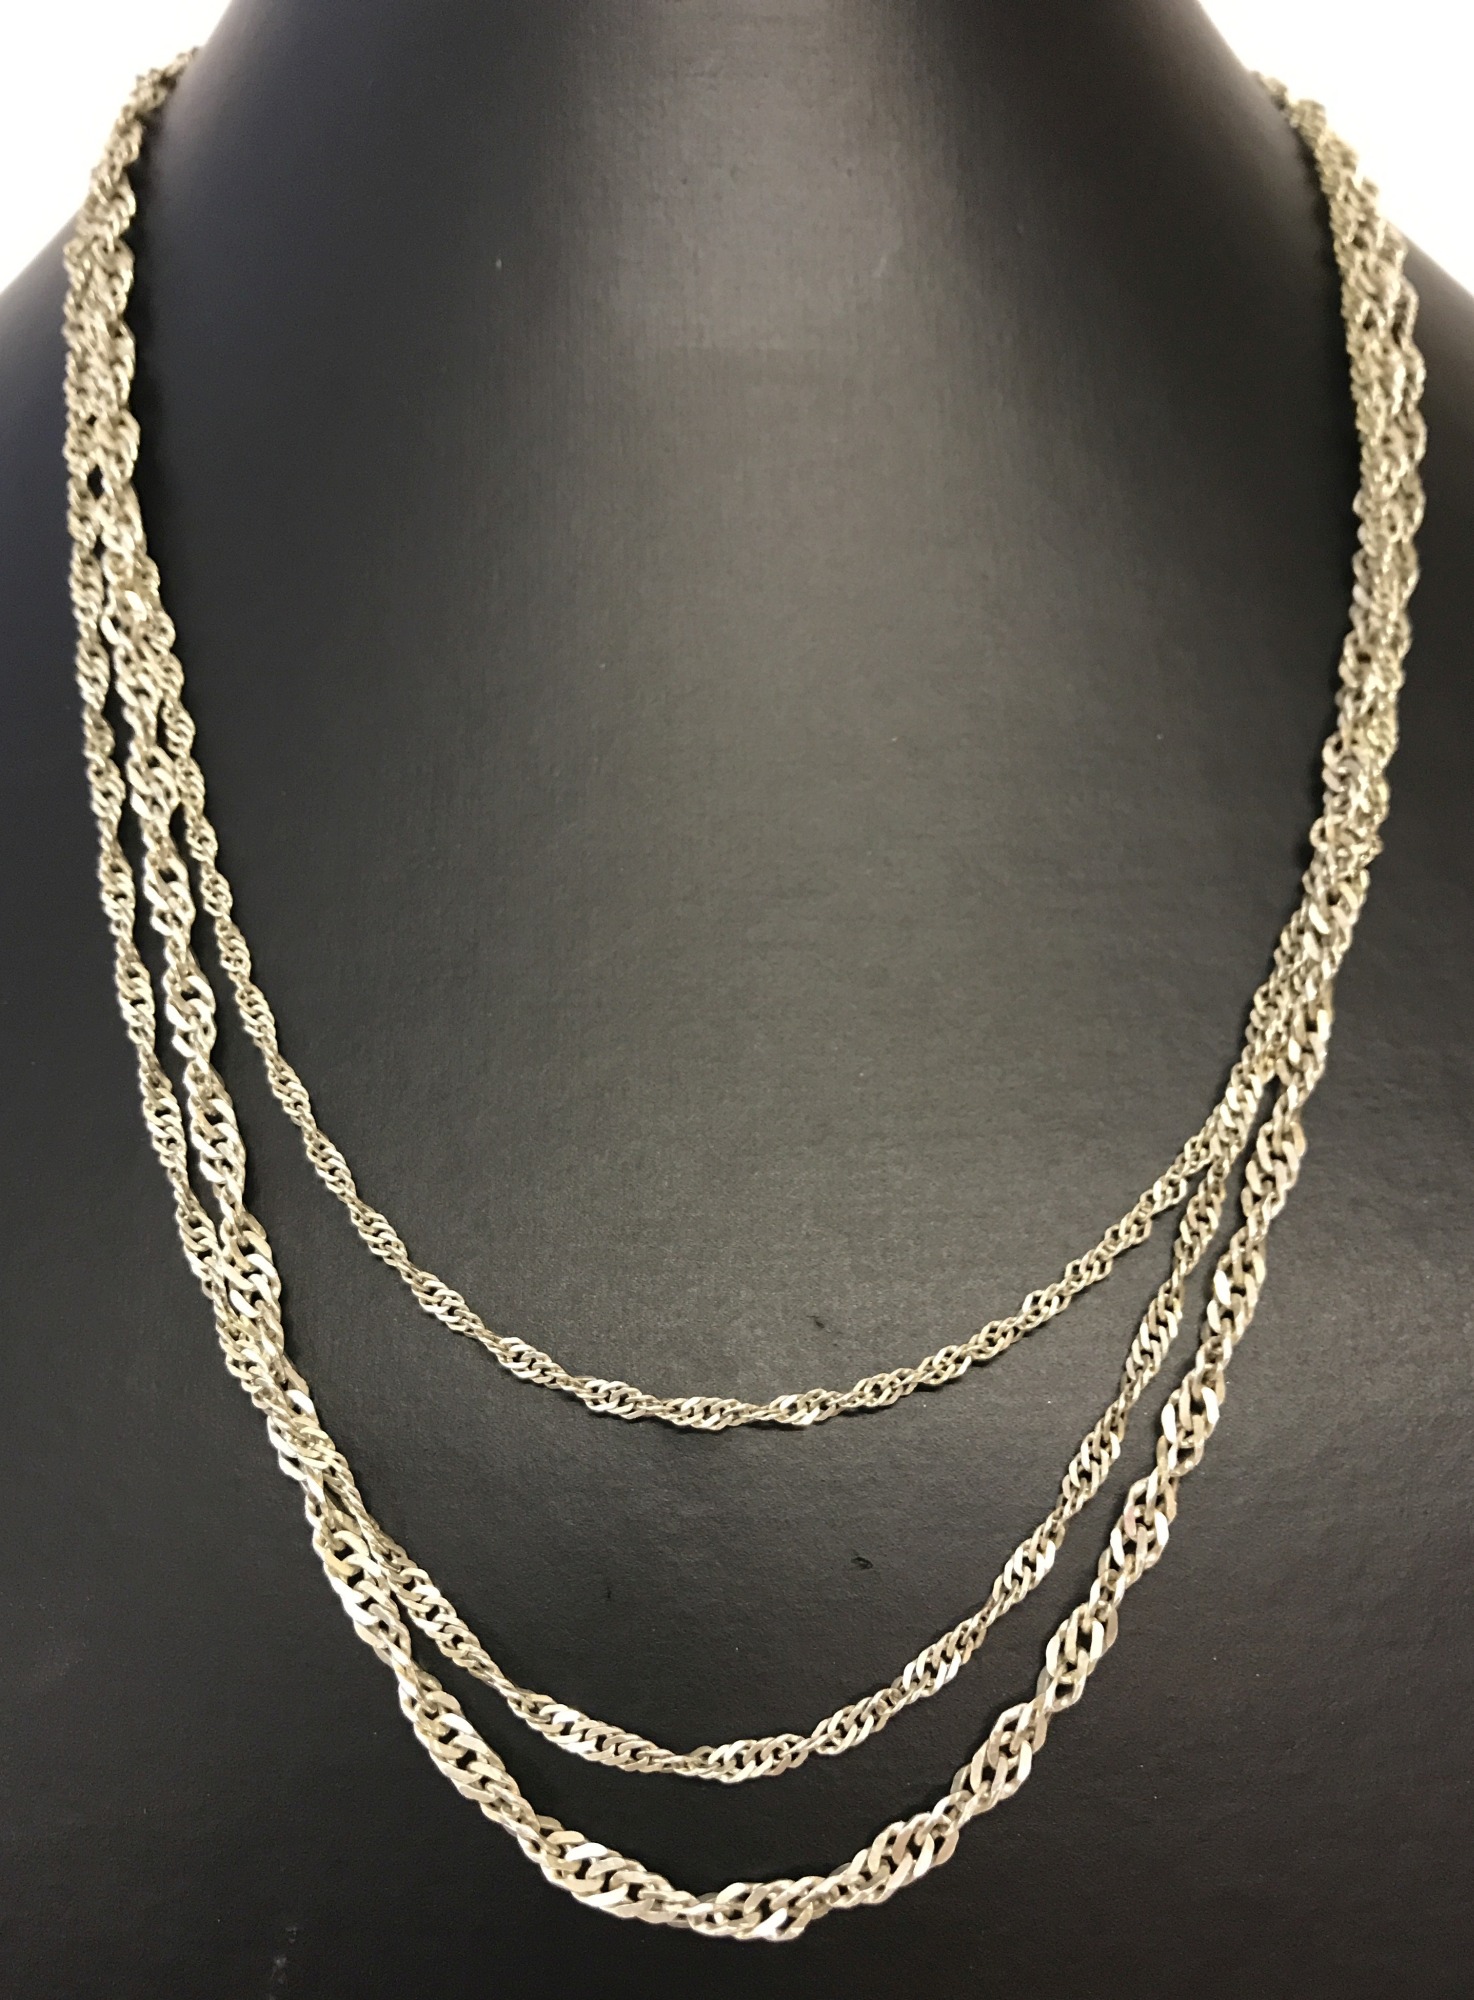 A graduating strand silver rope chain necklace.